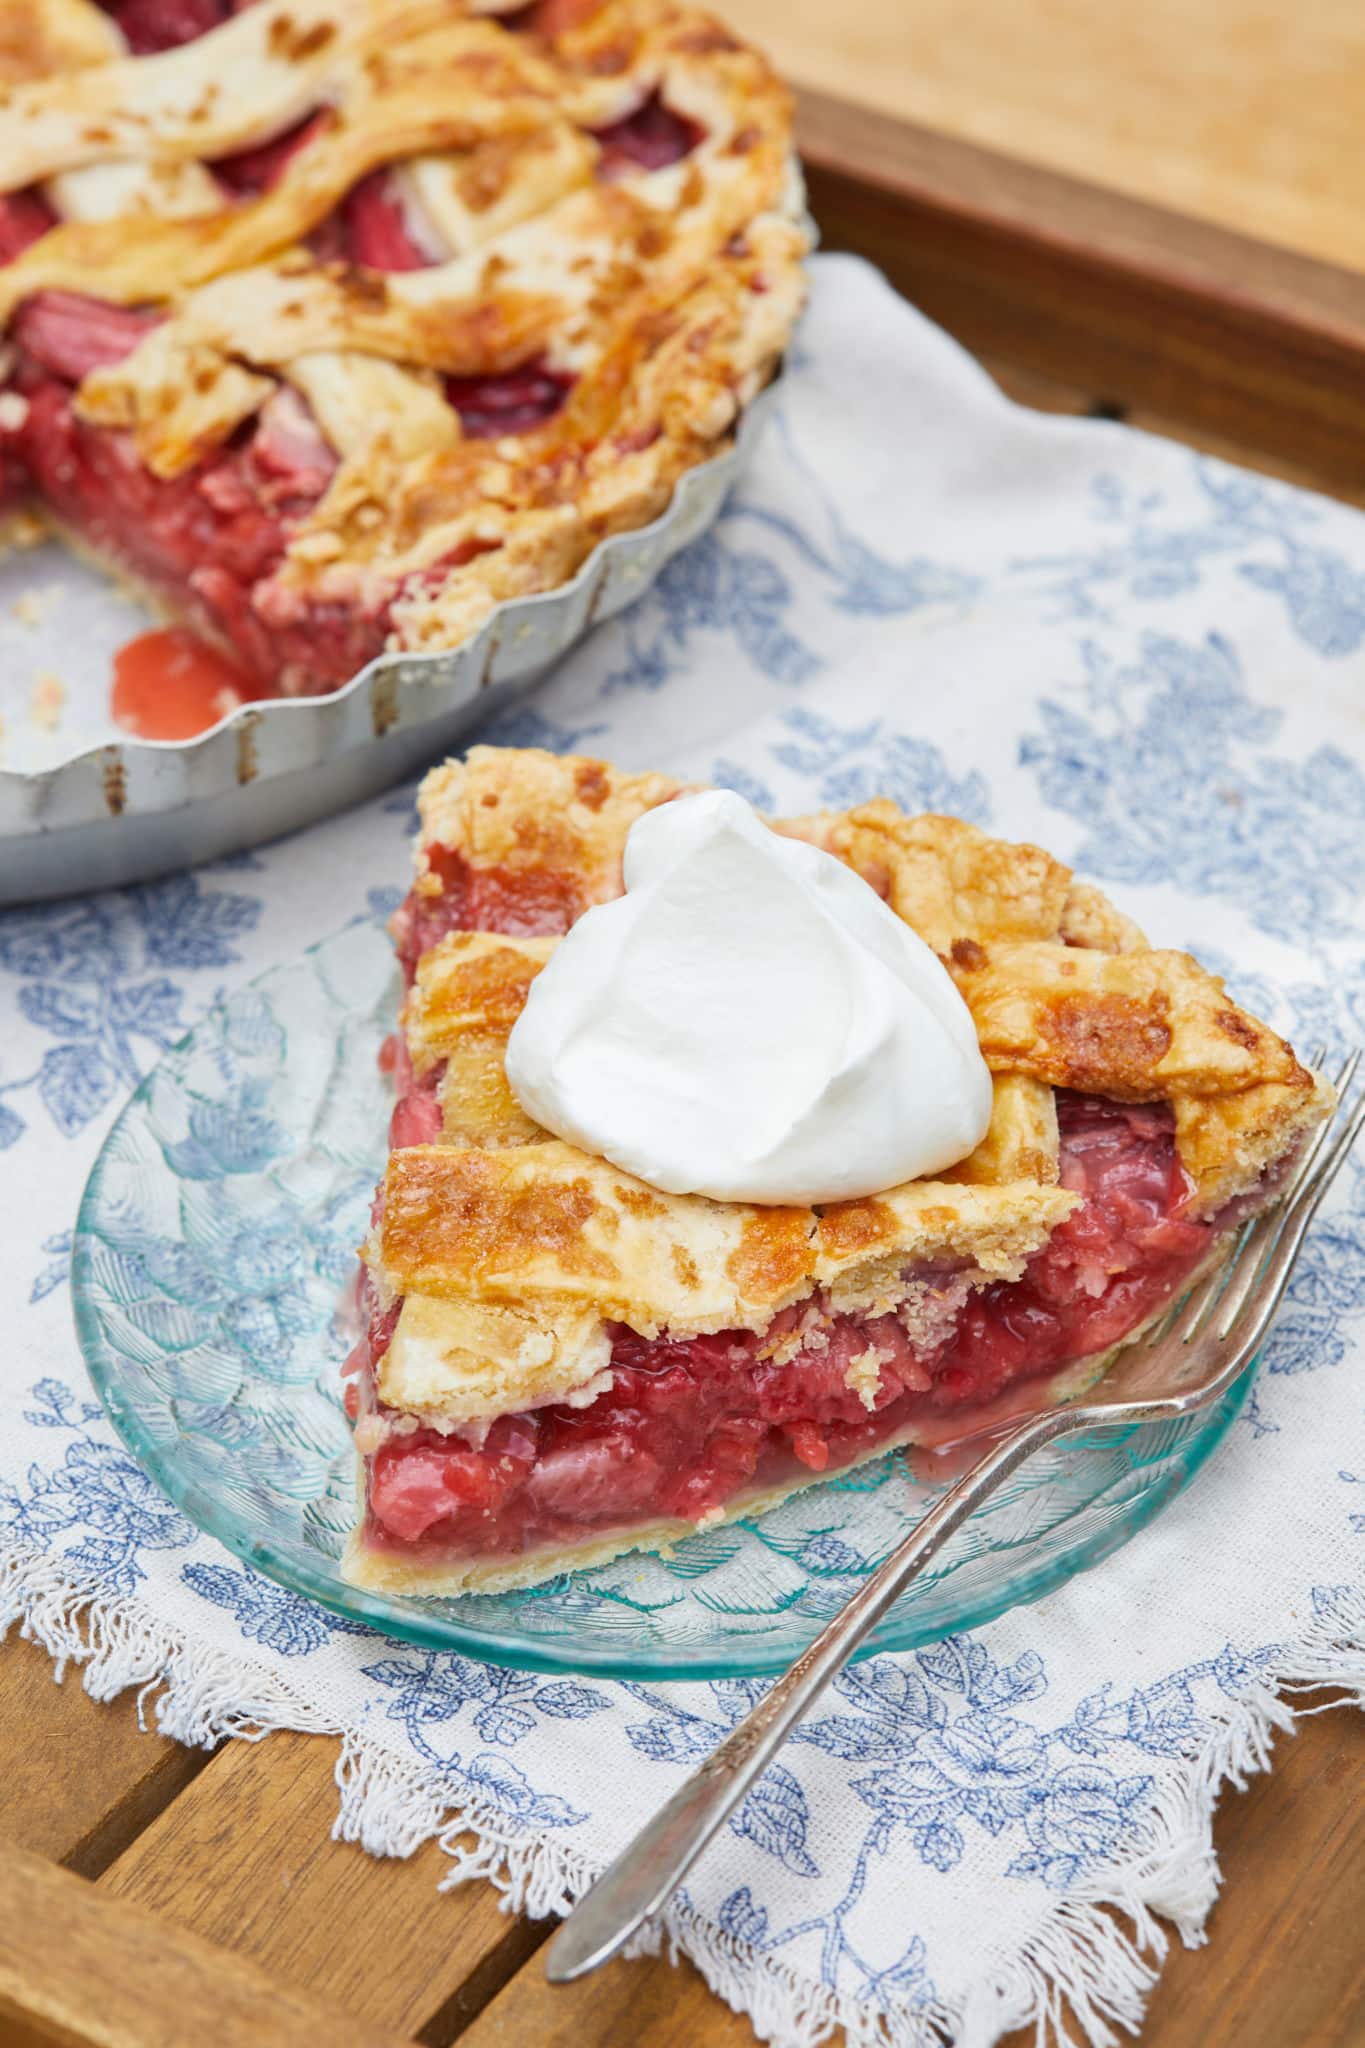 A slice of my easy strawberry pie recipe with a dollop of whipped cream on top.